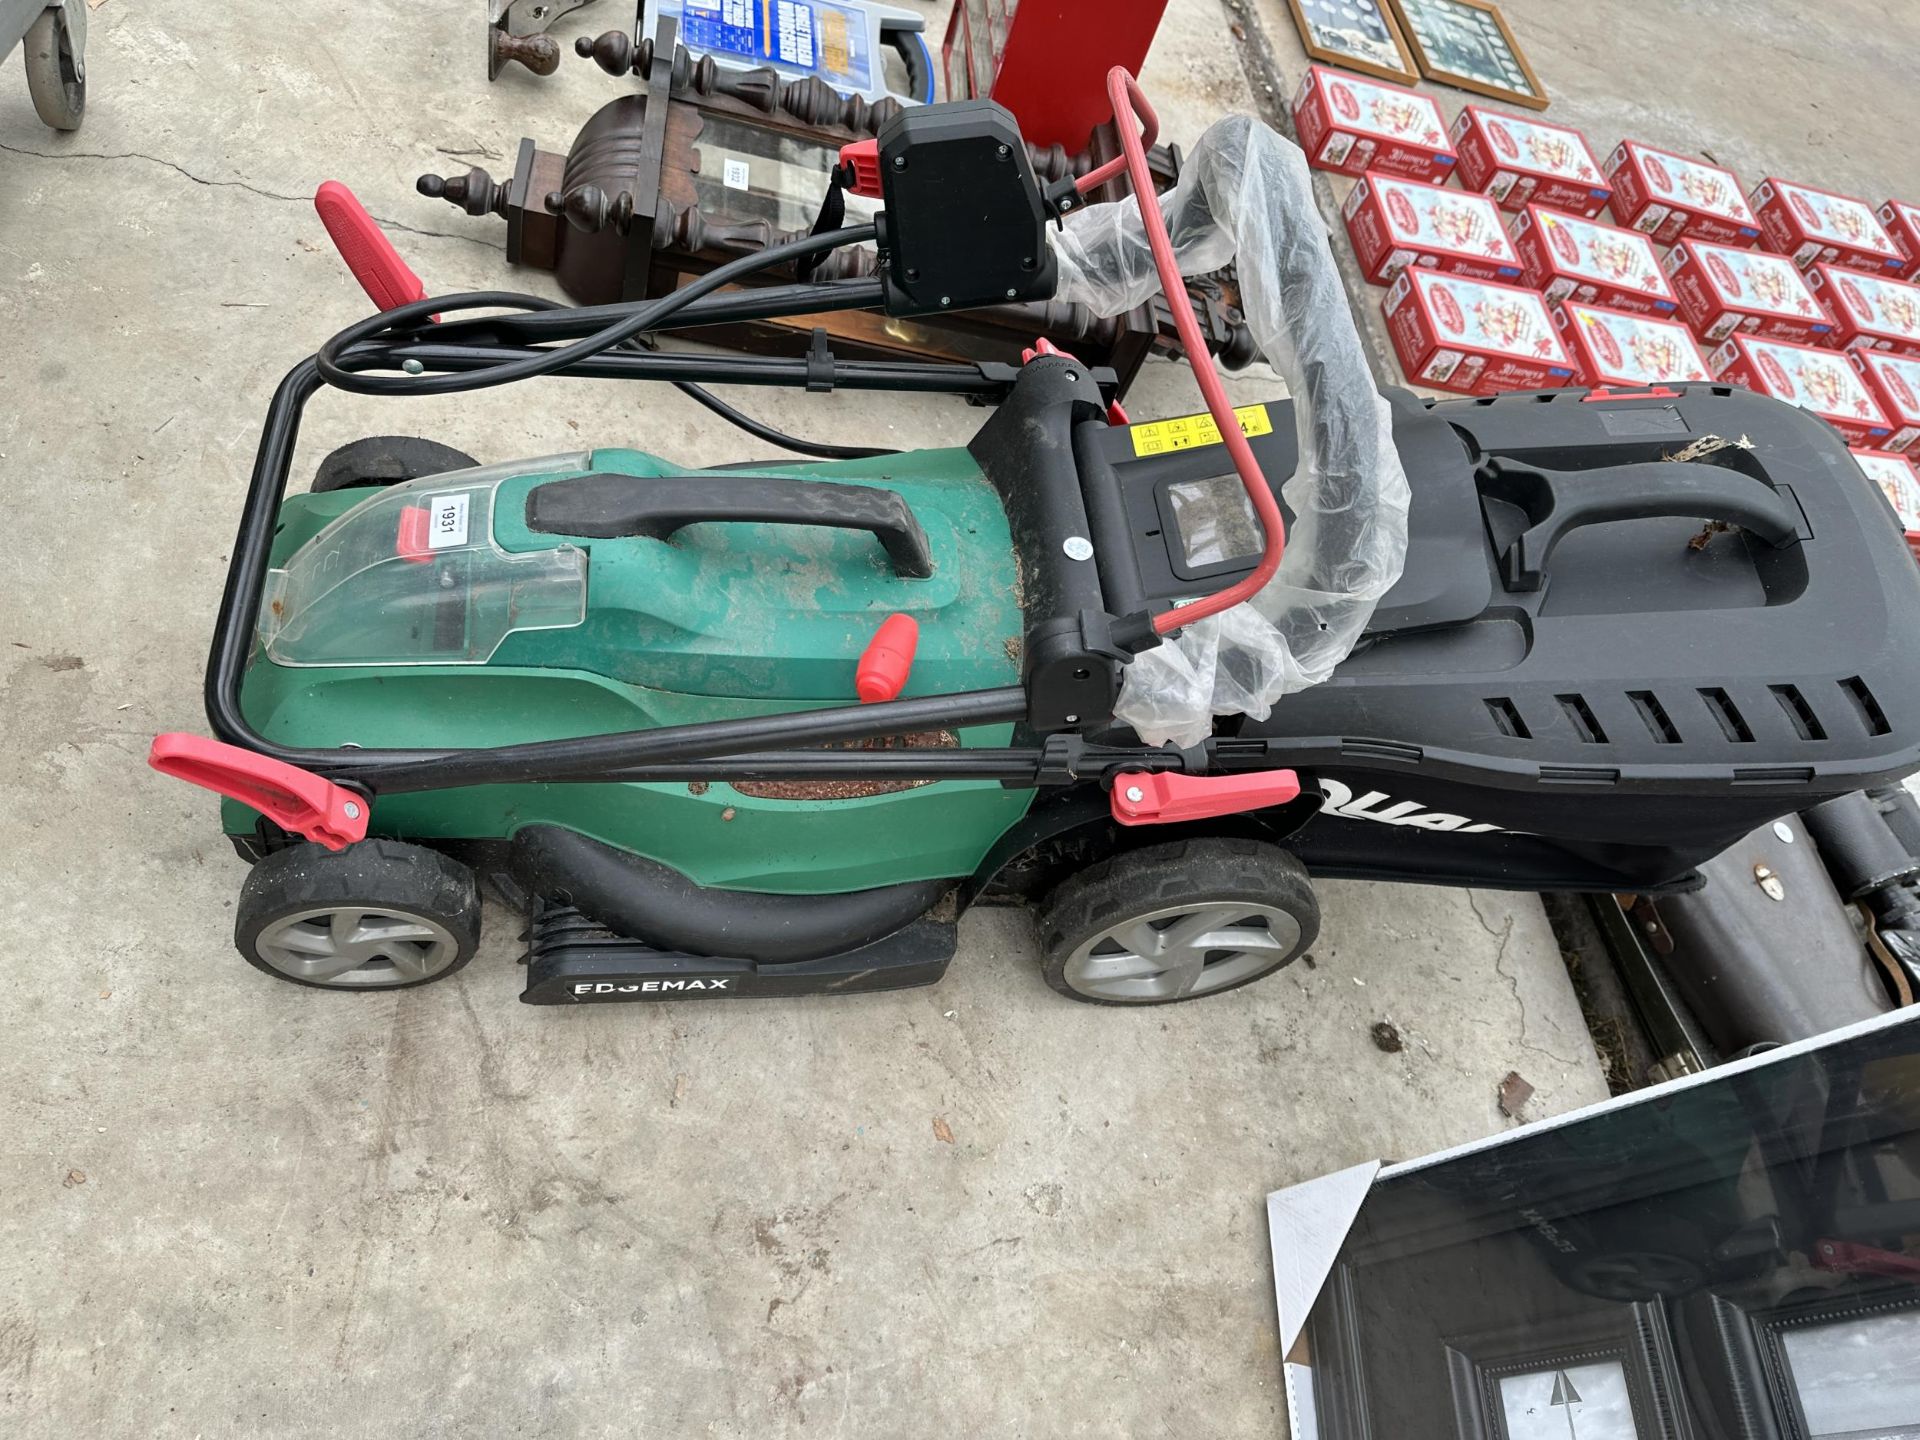 AN ELECTRIC QUALCAST LAWN MOWER WITH GRASS BOX